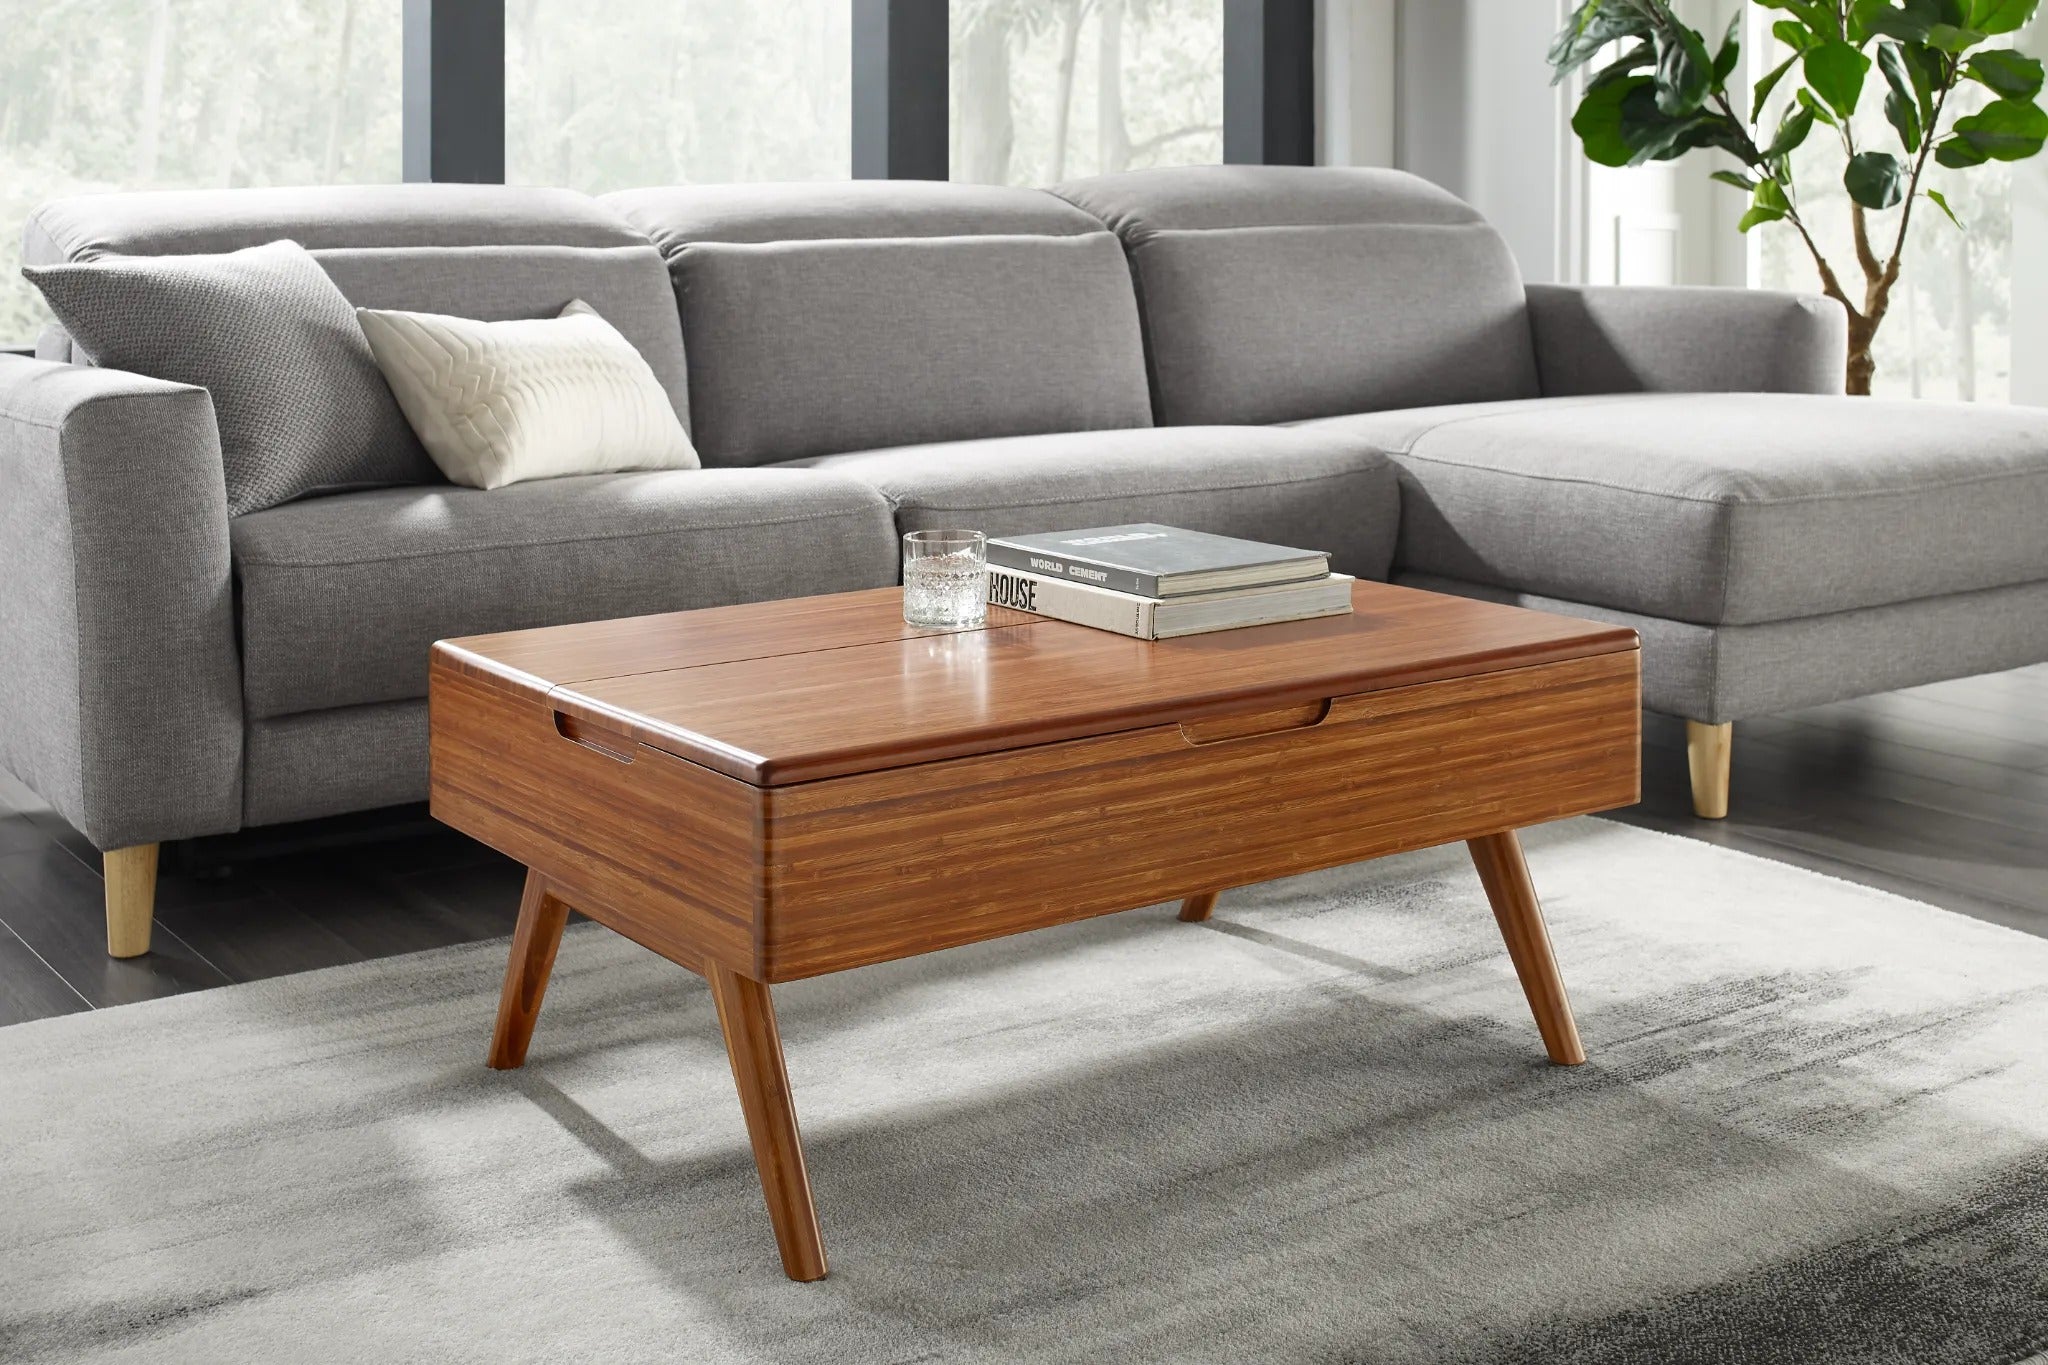 Rhody Lift Coffee Table with Storage